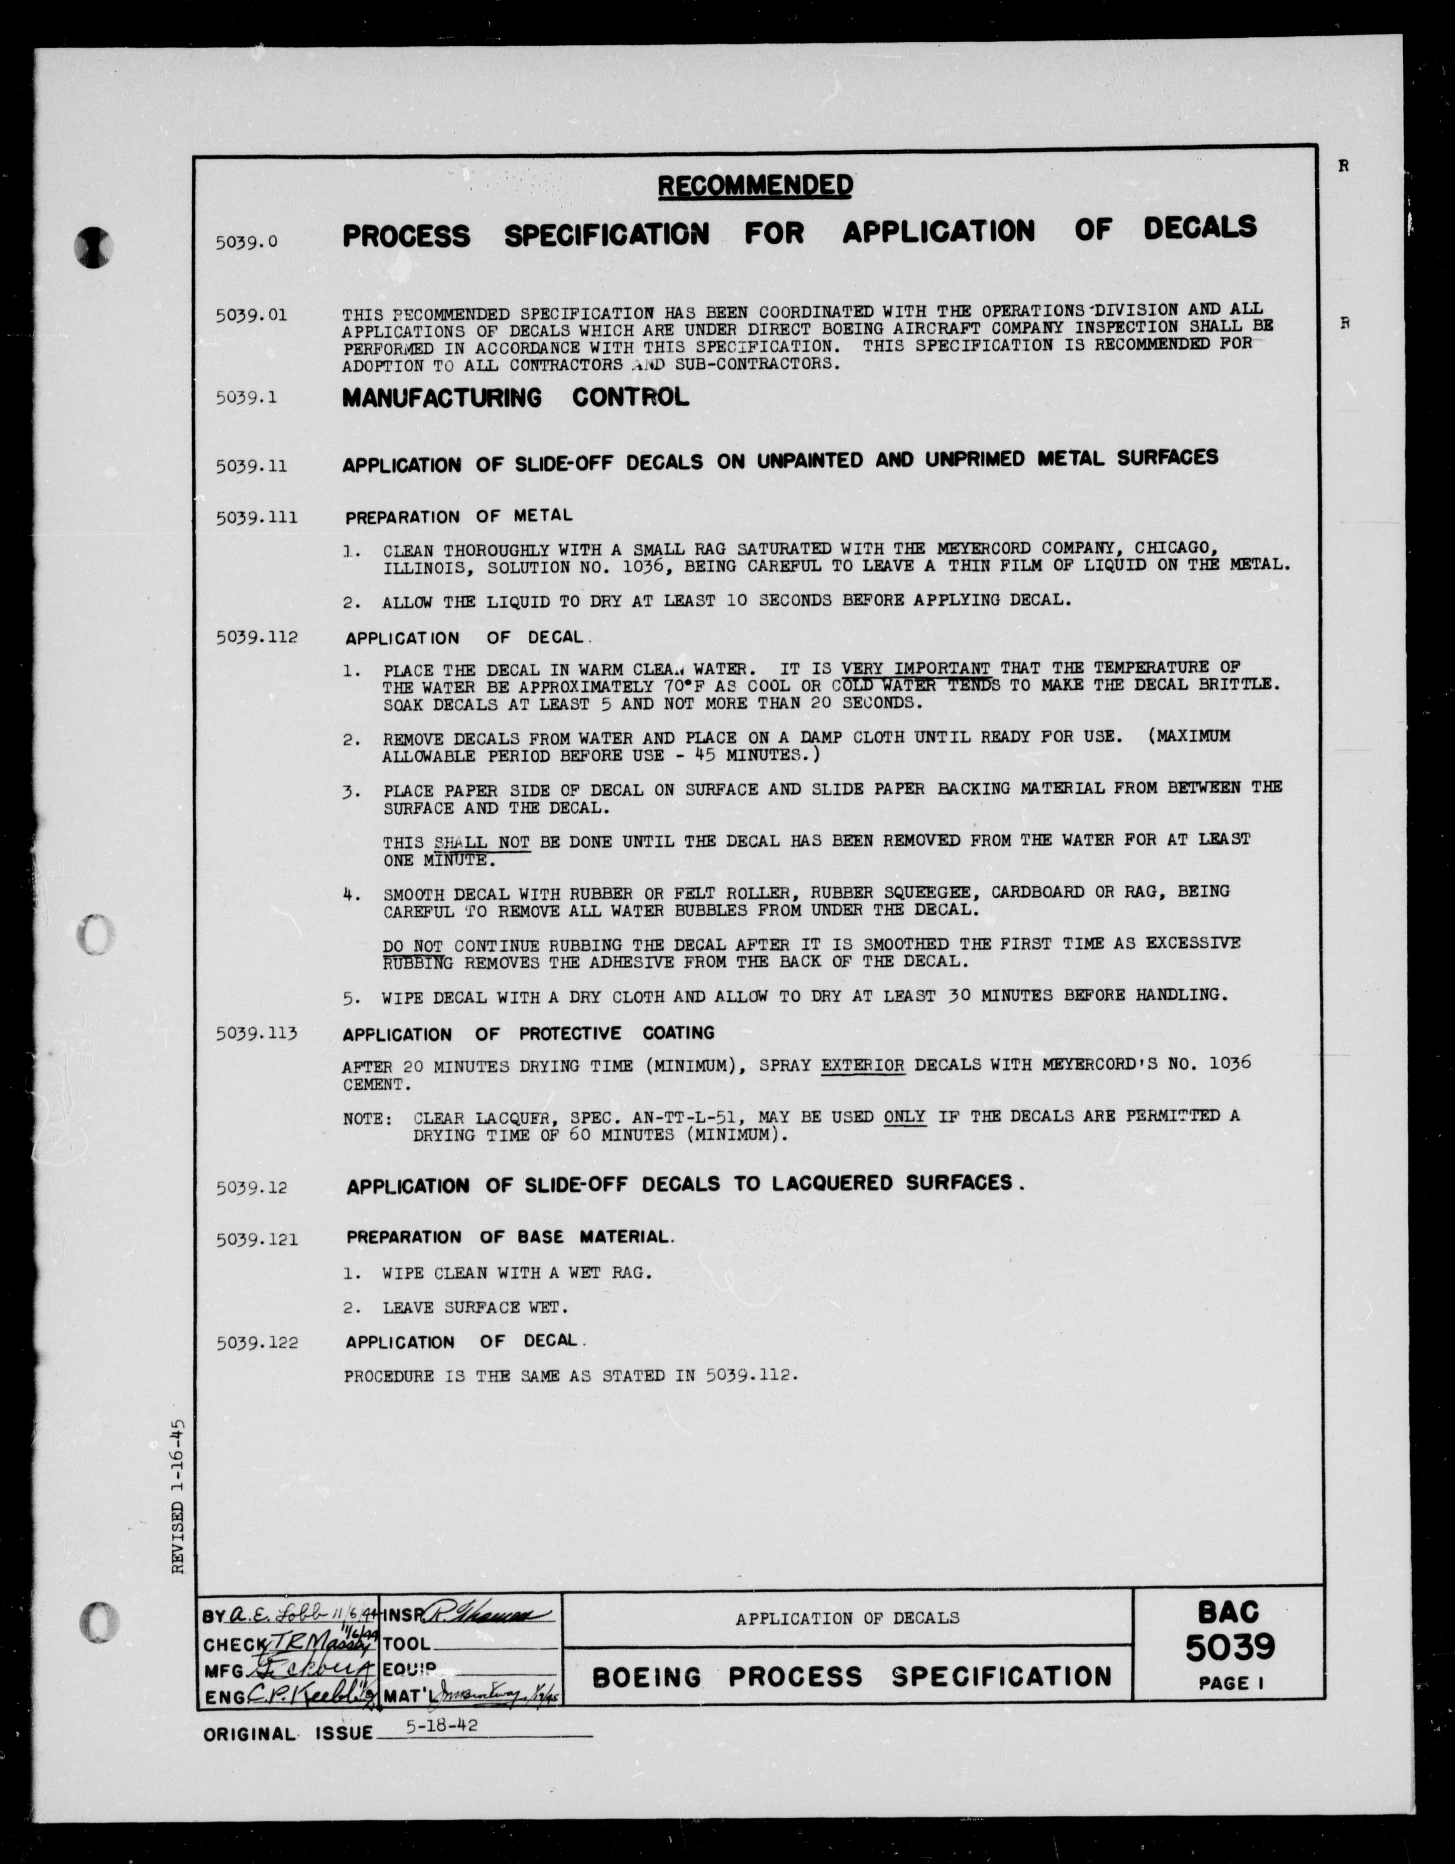 Sample page 1 from AirCorps Library document: Application of Decals